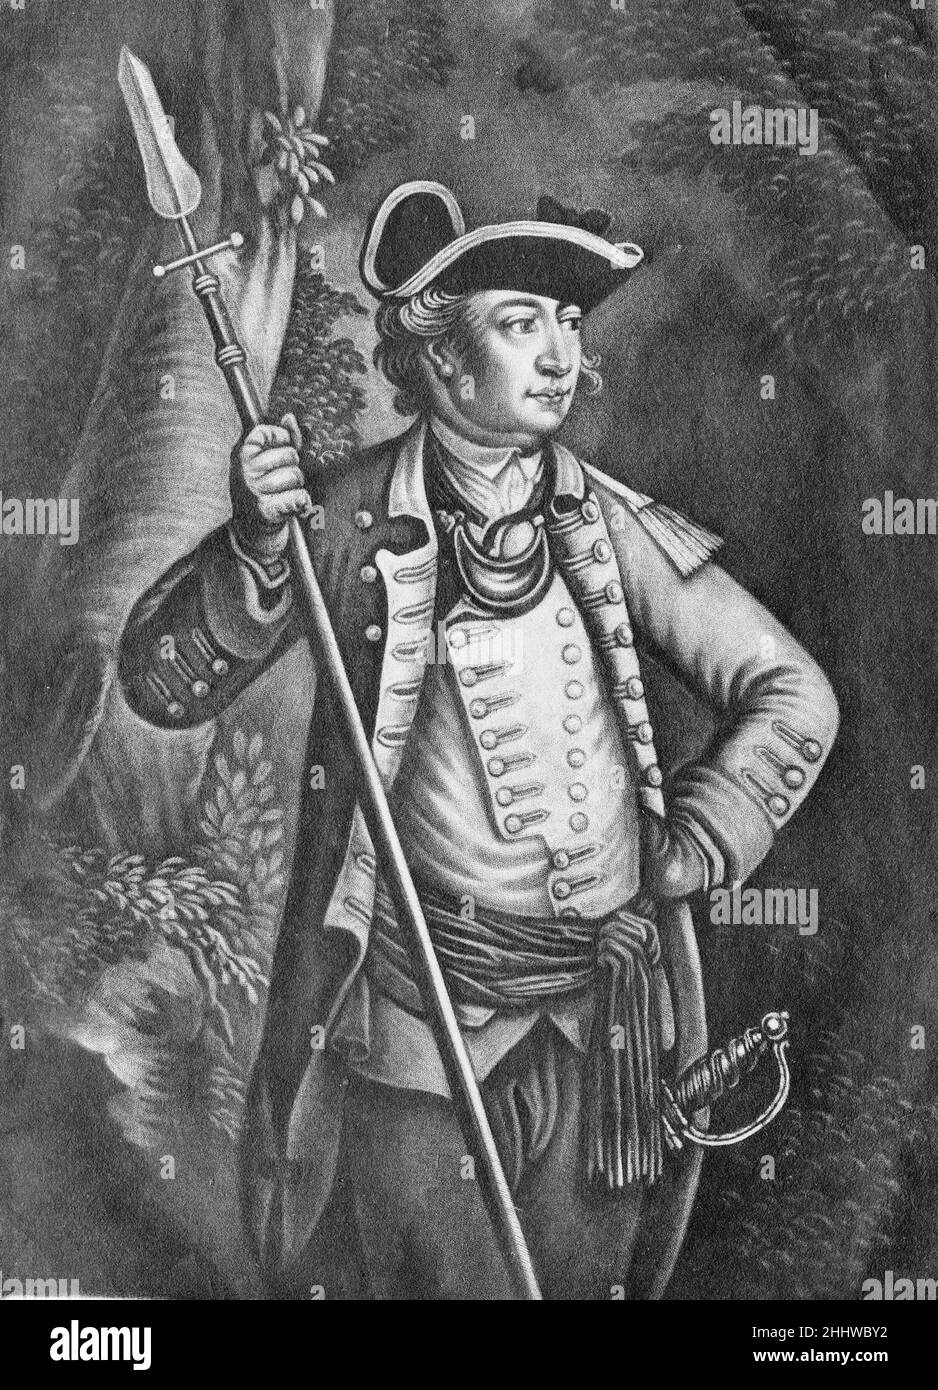 Major General John Sullivan August 22, 1776 Anonymous, British, 18th century British The son of Irish immigrants, Sullivan was elected to the Continental Congress, served as a major general in the Continental army during the American Revolution, and later became governor of New Hampshire. This mezzotint portrait published in London shortly after the Declaration of Independence, shows him holding a spontoon (or half pike) and wearing a sword.. Major General John Sullivan  363853 Stock Photo